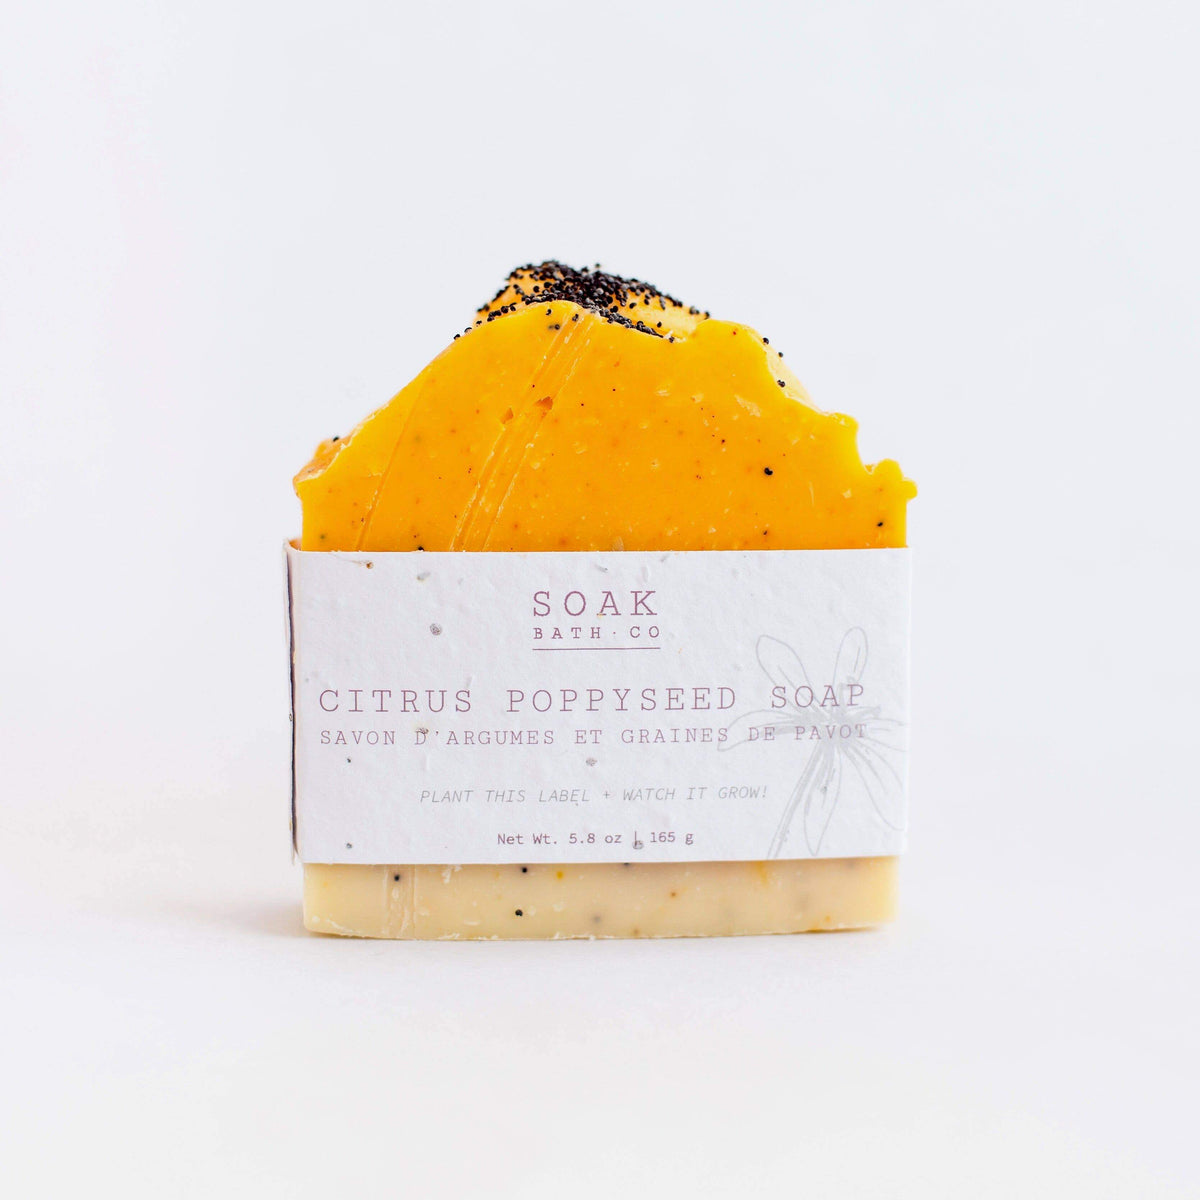 A bar of SOAK Bath Co. - Citrus Poppyseed Soap, wrapped in labeled paper that can be planted. This zero waste soap is topped with a yellow, textured surface sprinkled with black poppy seeds.